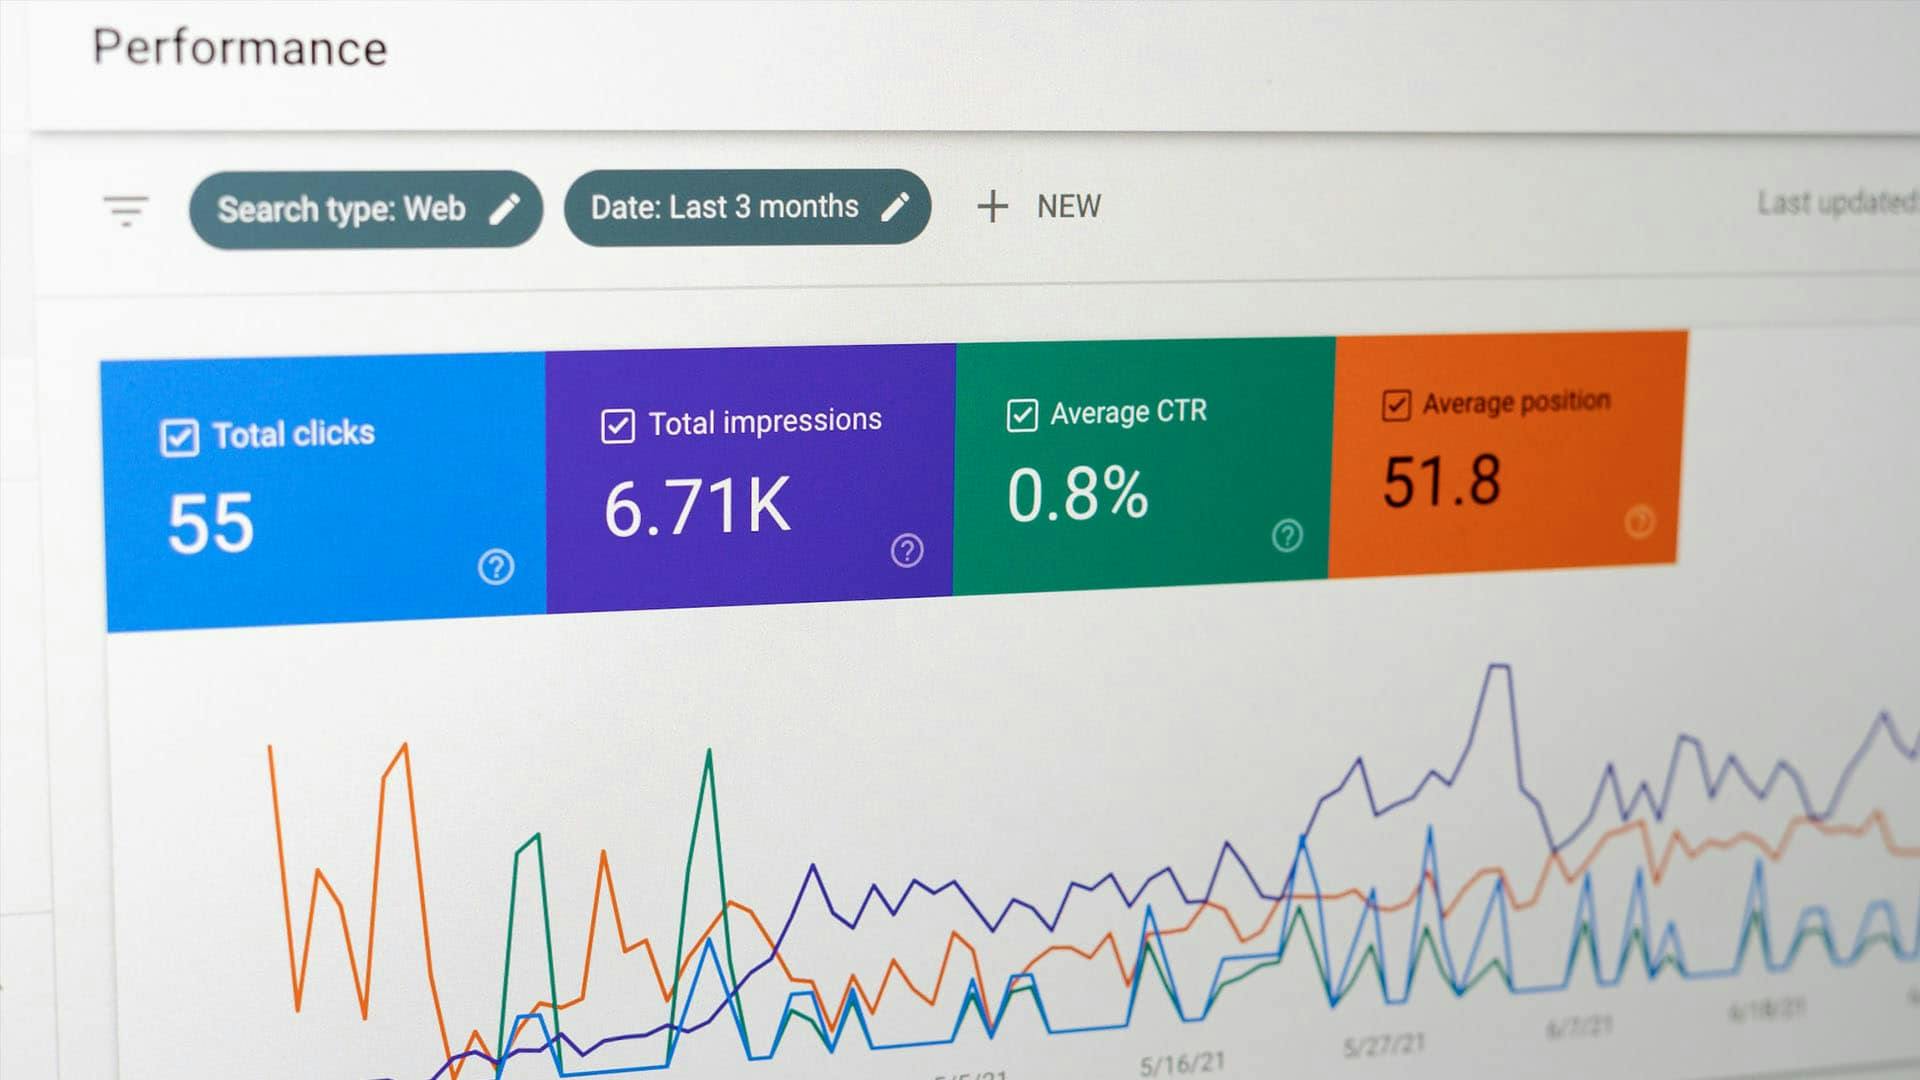 Google Search Console Performance statistics of a blog